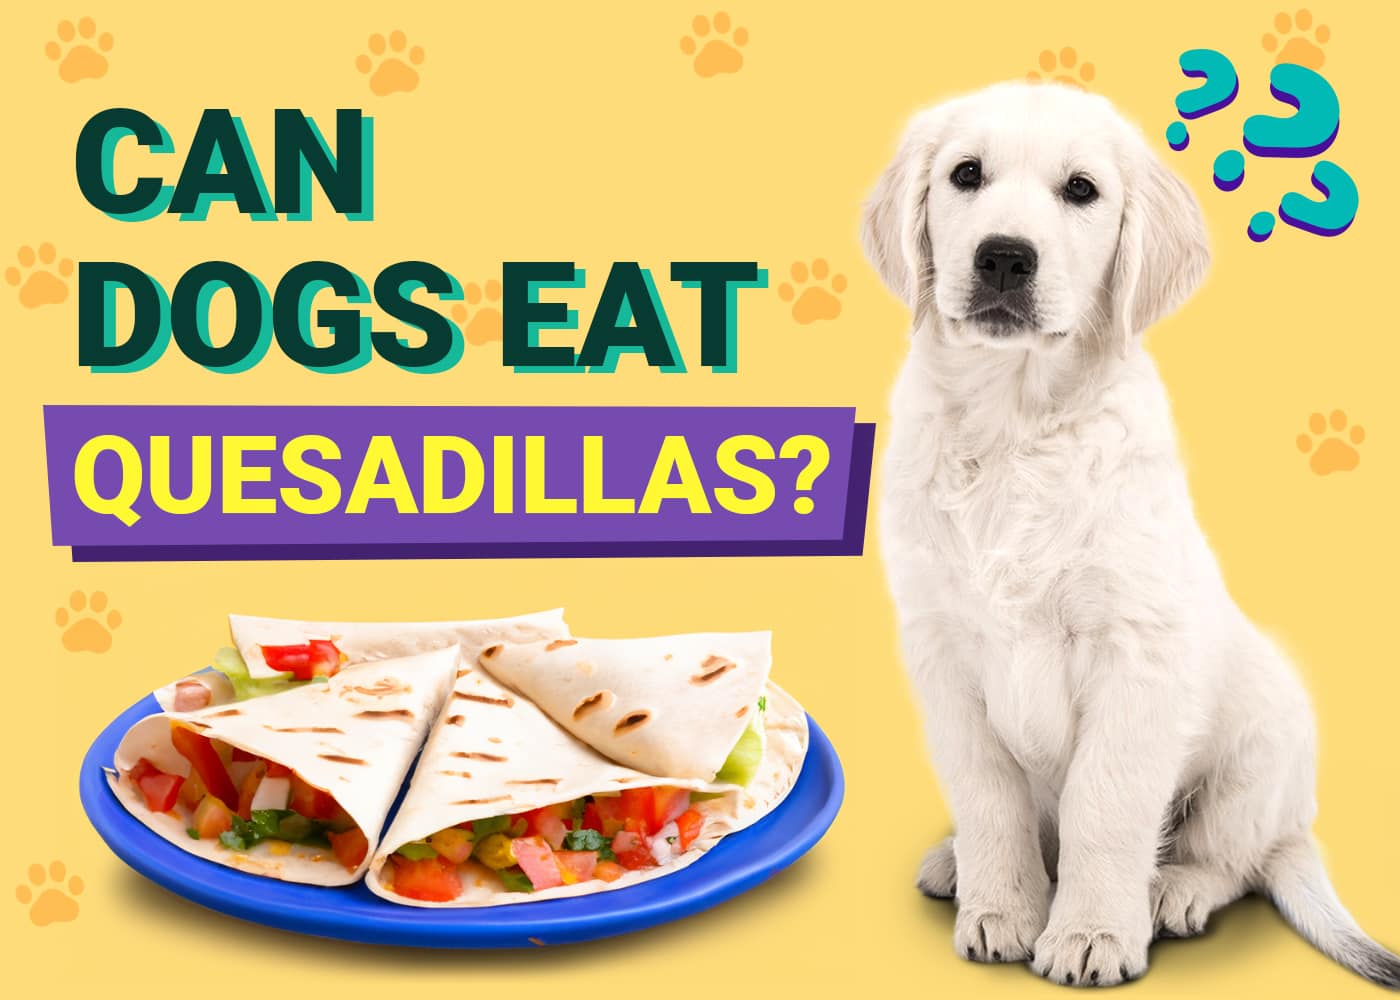 Can Dogs Eat Quesadillas